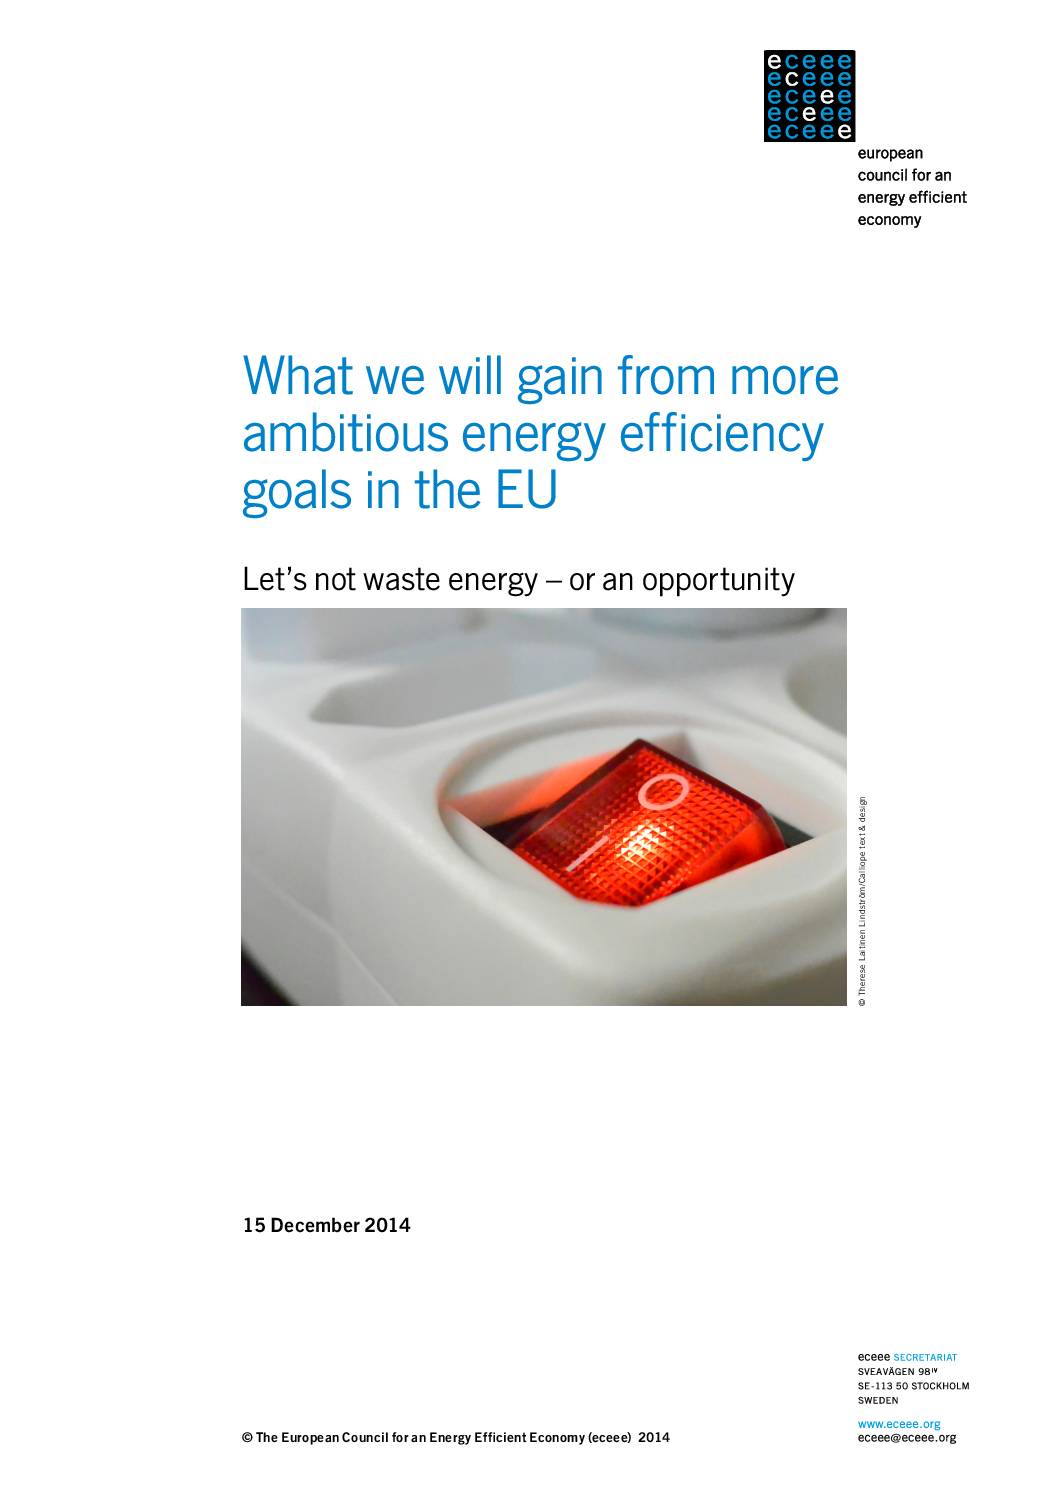 What we will gain from more ambitious energy efficiency goals in the EU: Let’s not waste energy – or an opportunity